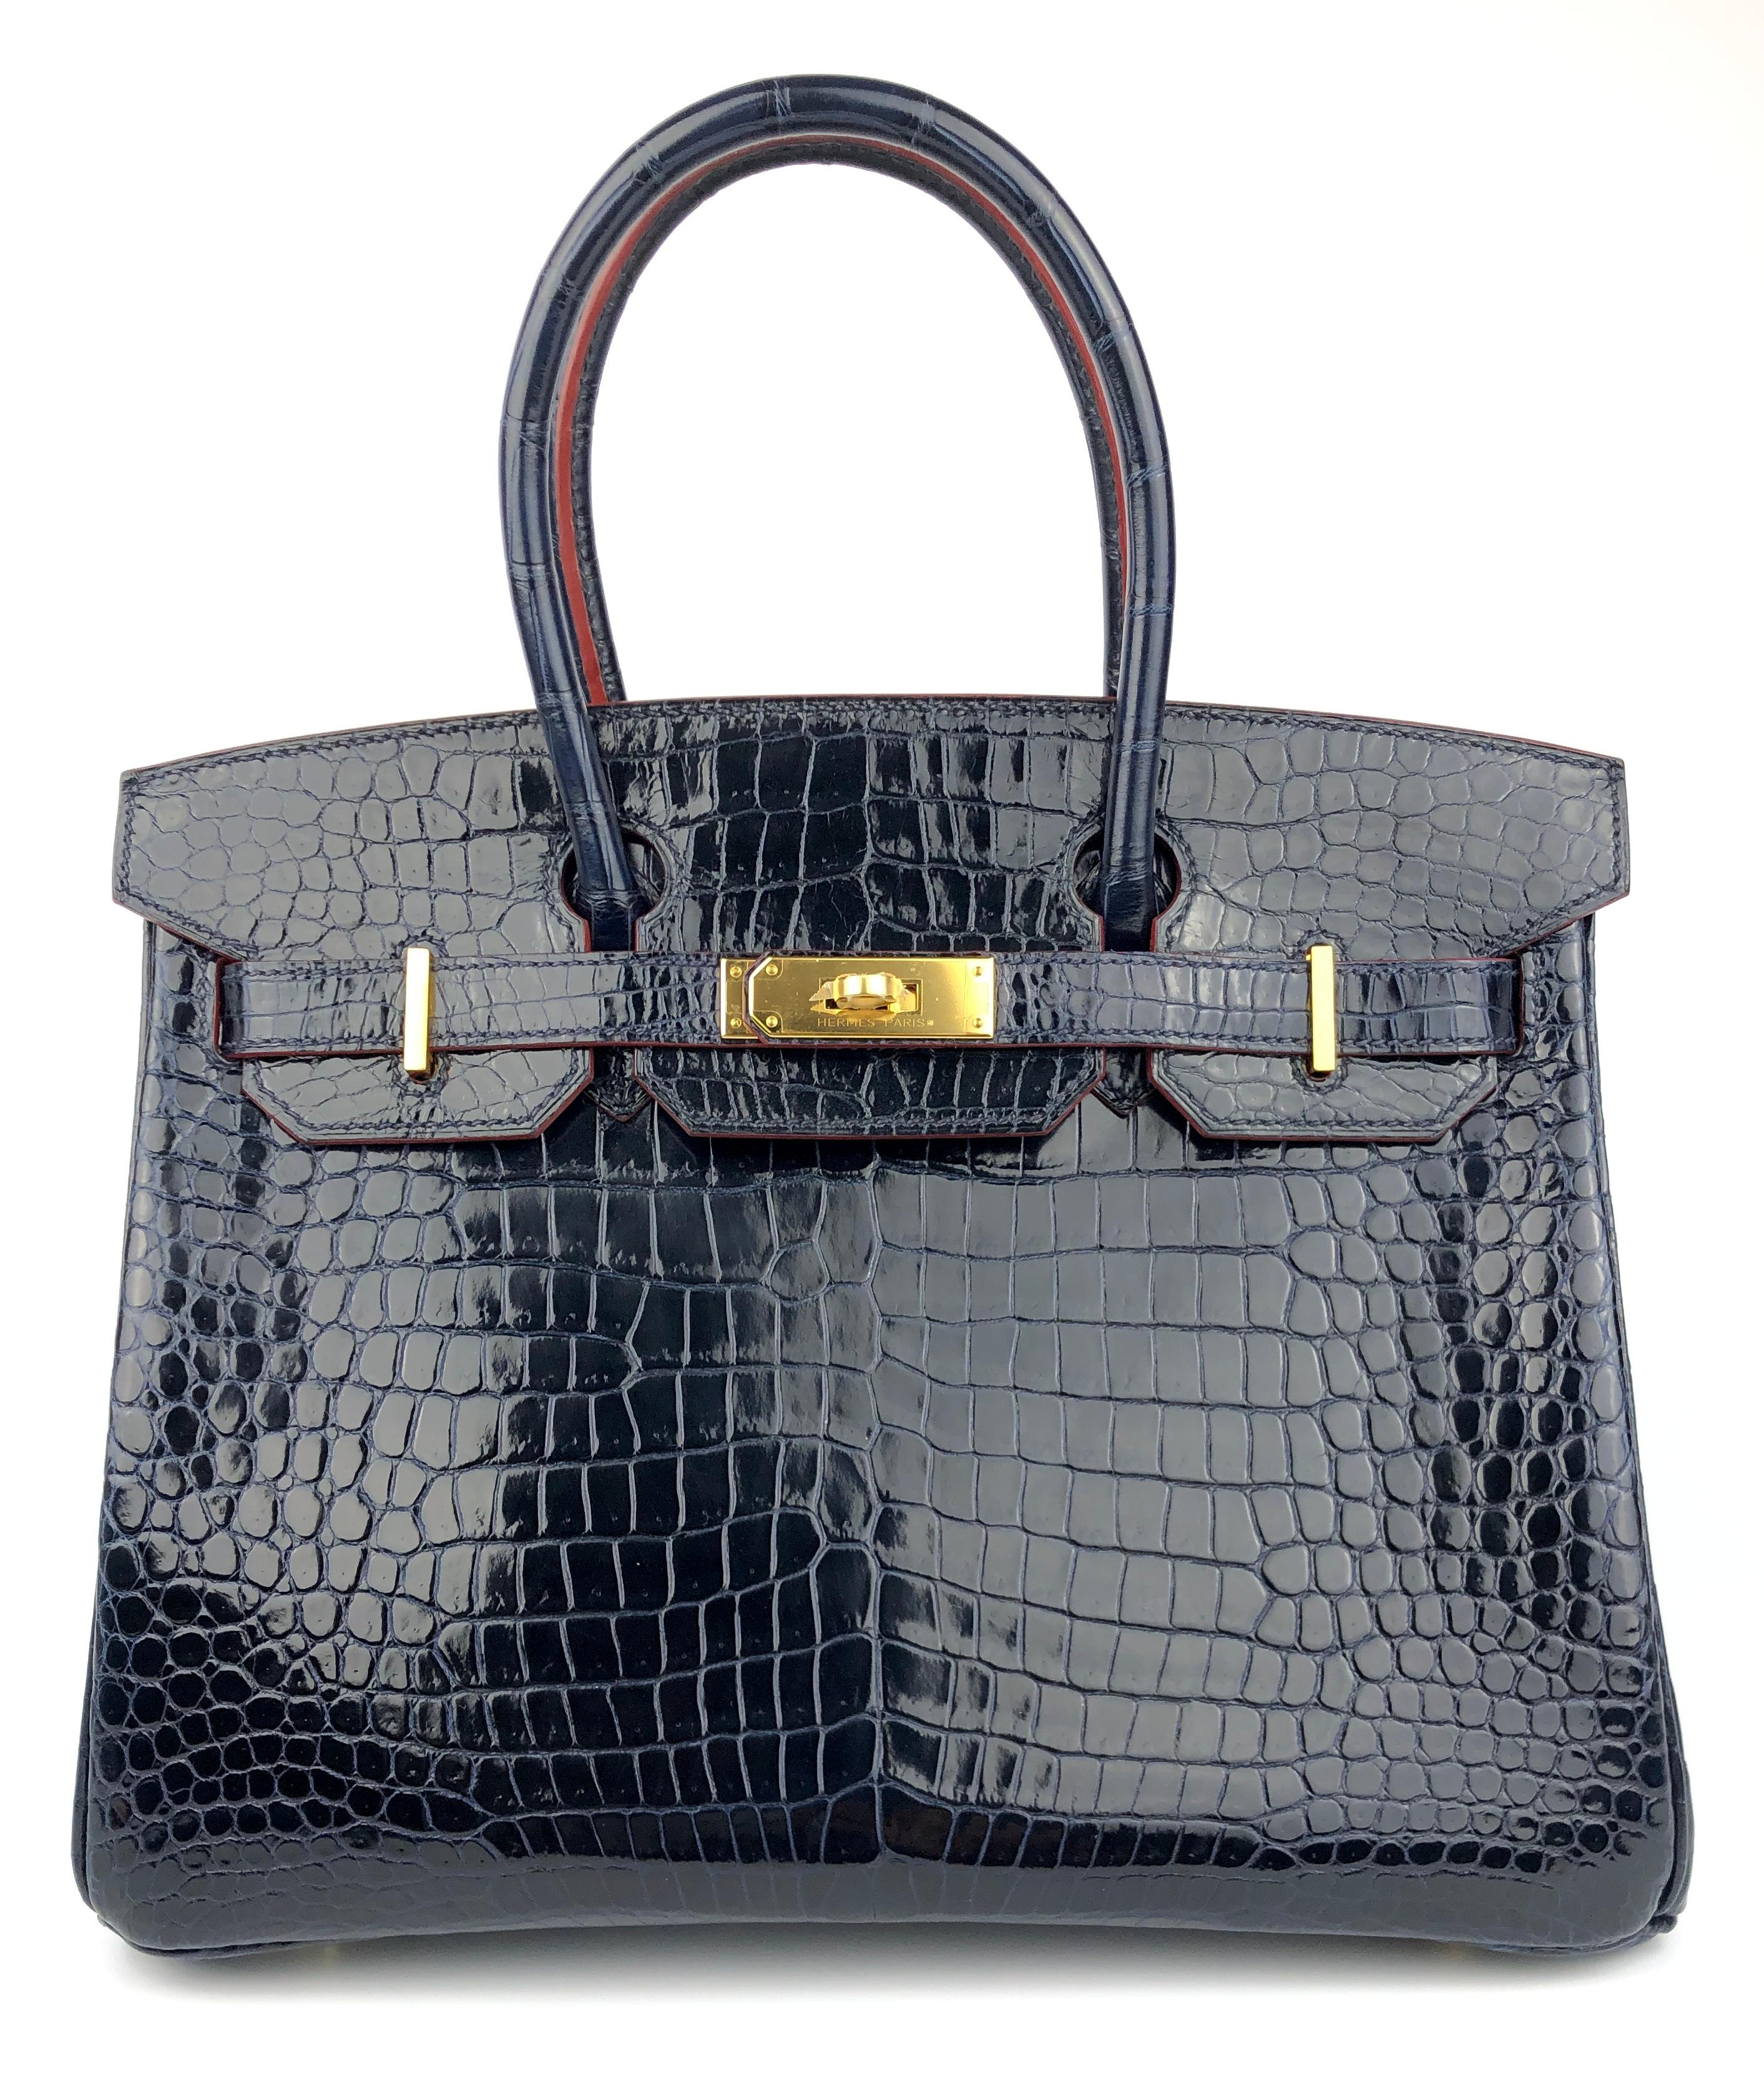 Absolutely Stunning RARE As New Hermes Birkin 30 Blue Marine Rouge H Contour Crocodile Skin Leather Gold Hardware. Plastic on all hardware and feet. 2016 X Stamp.

BEST PRICE ON THE MARKET GUARANTEED!

Shop with Confidence from Lux Addicts.